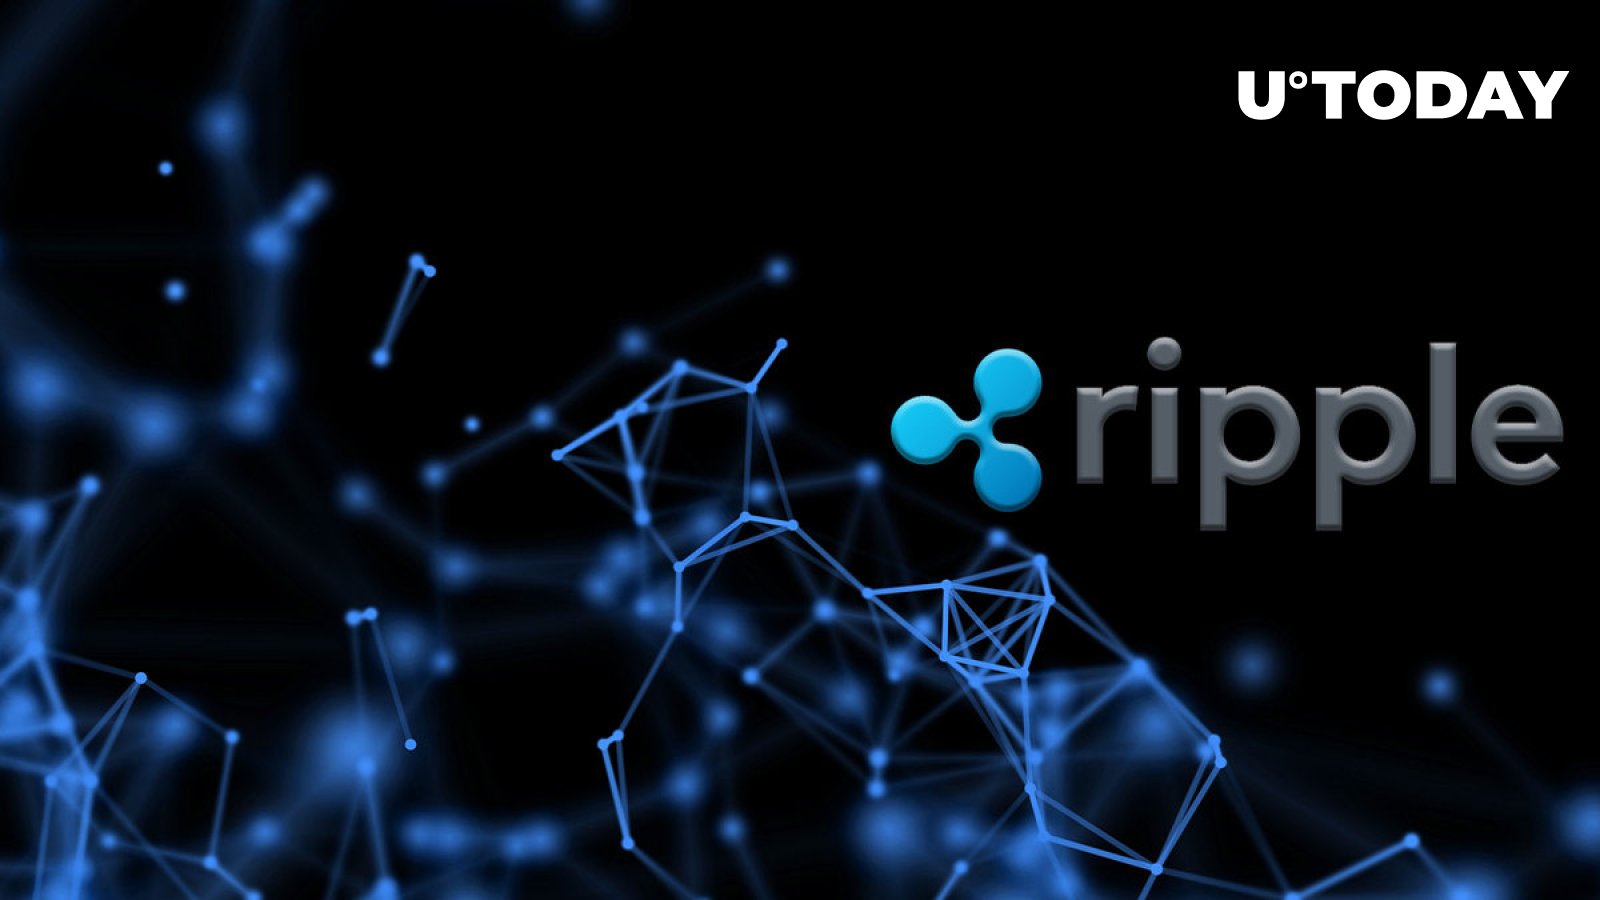 Ripple Executive Makes Unexpected Offer to FTX Employees: Details